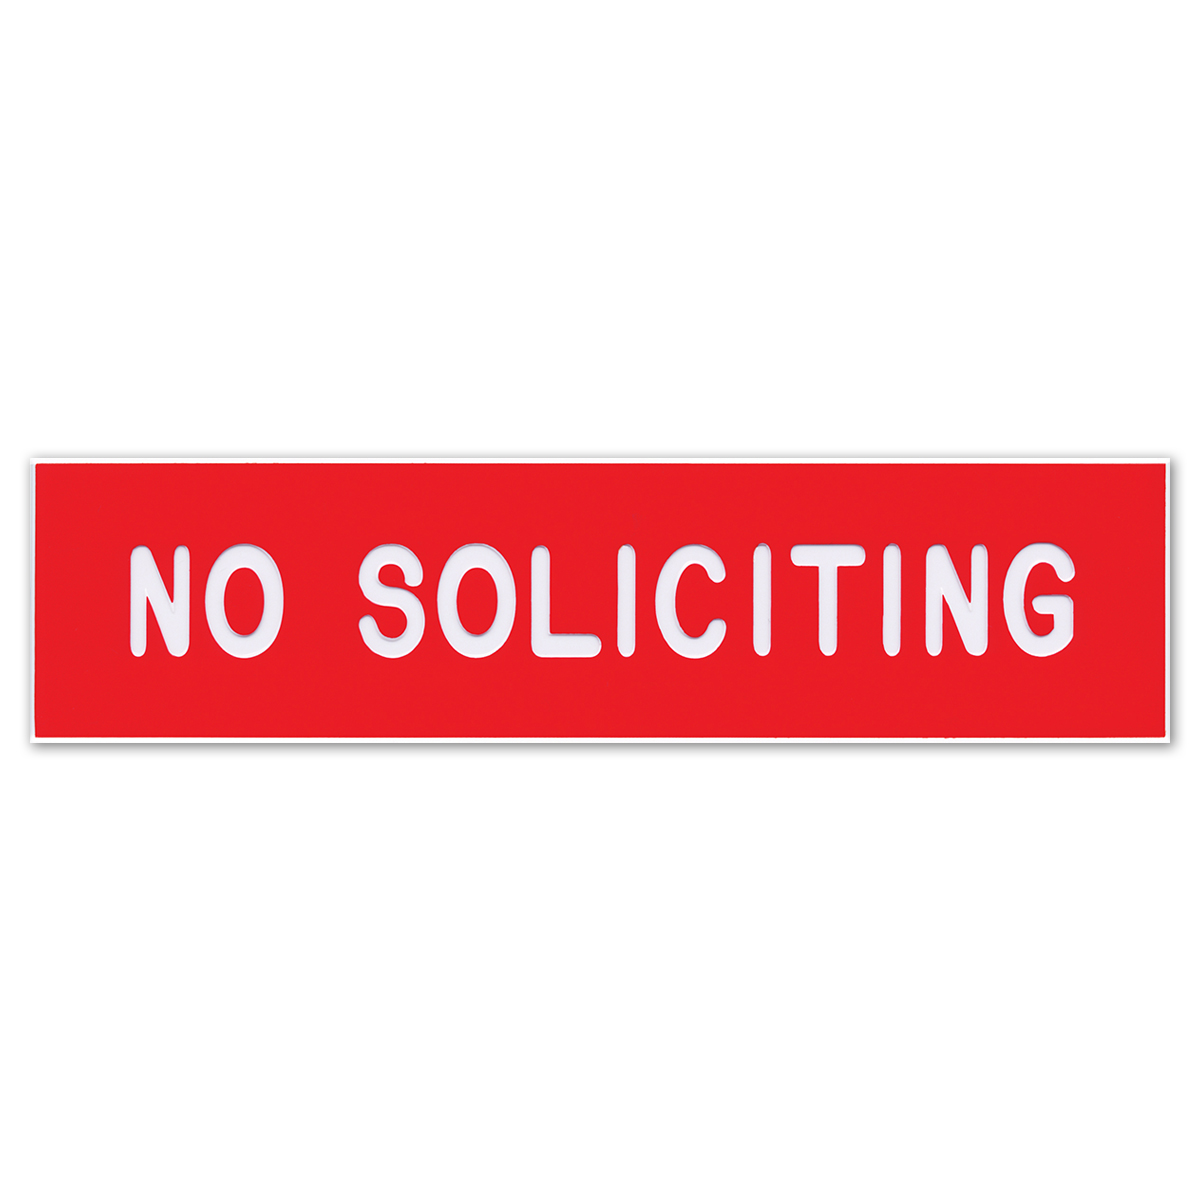 NO SOLICITING - Plastic Sign - 098001